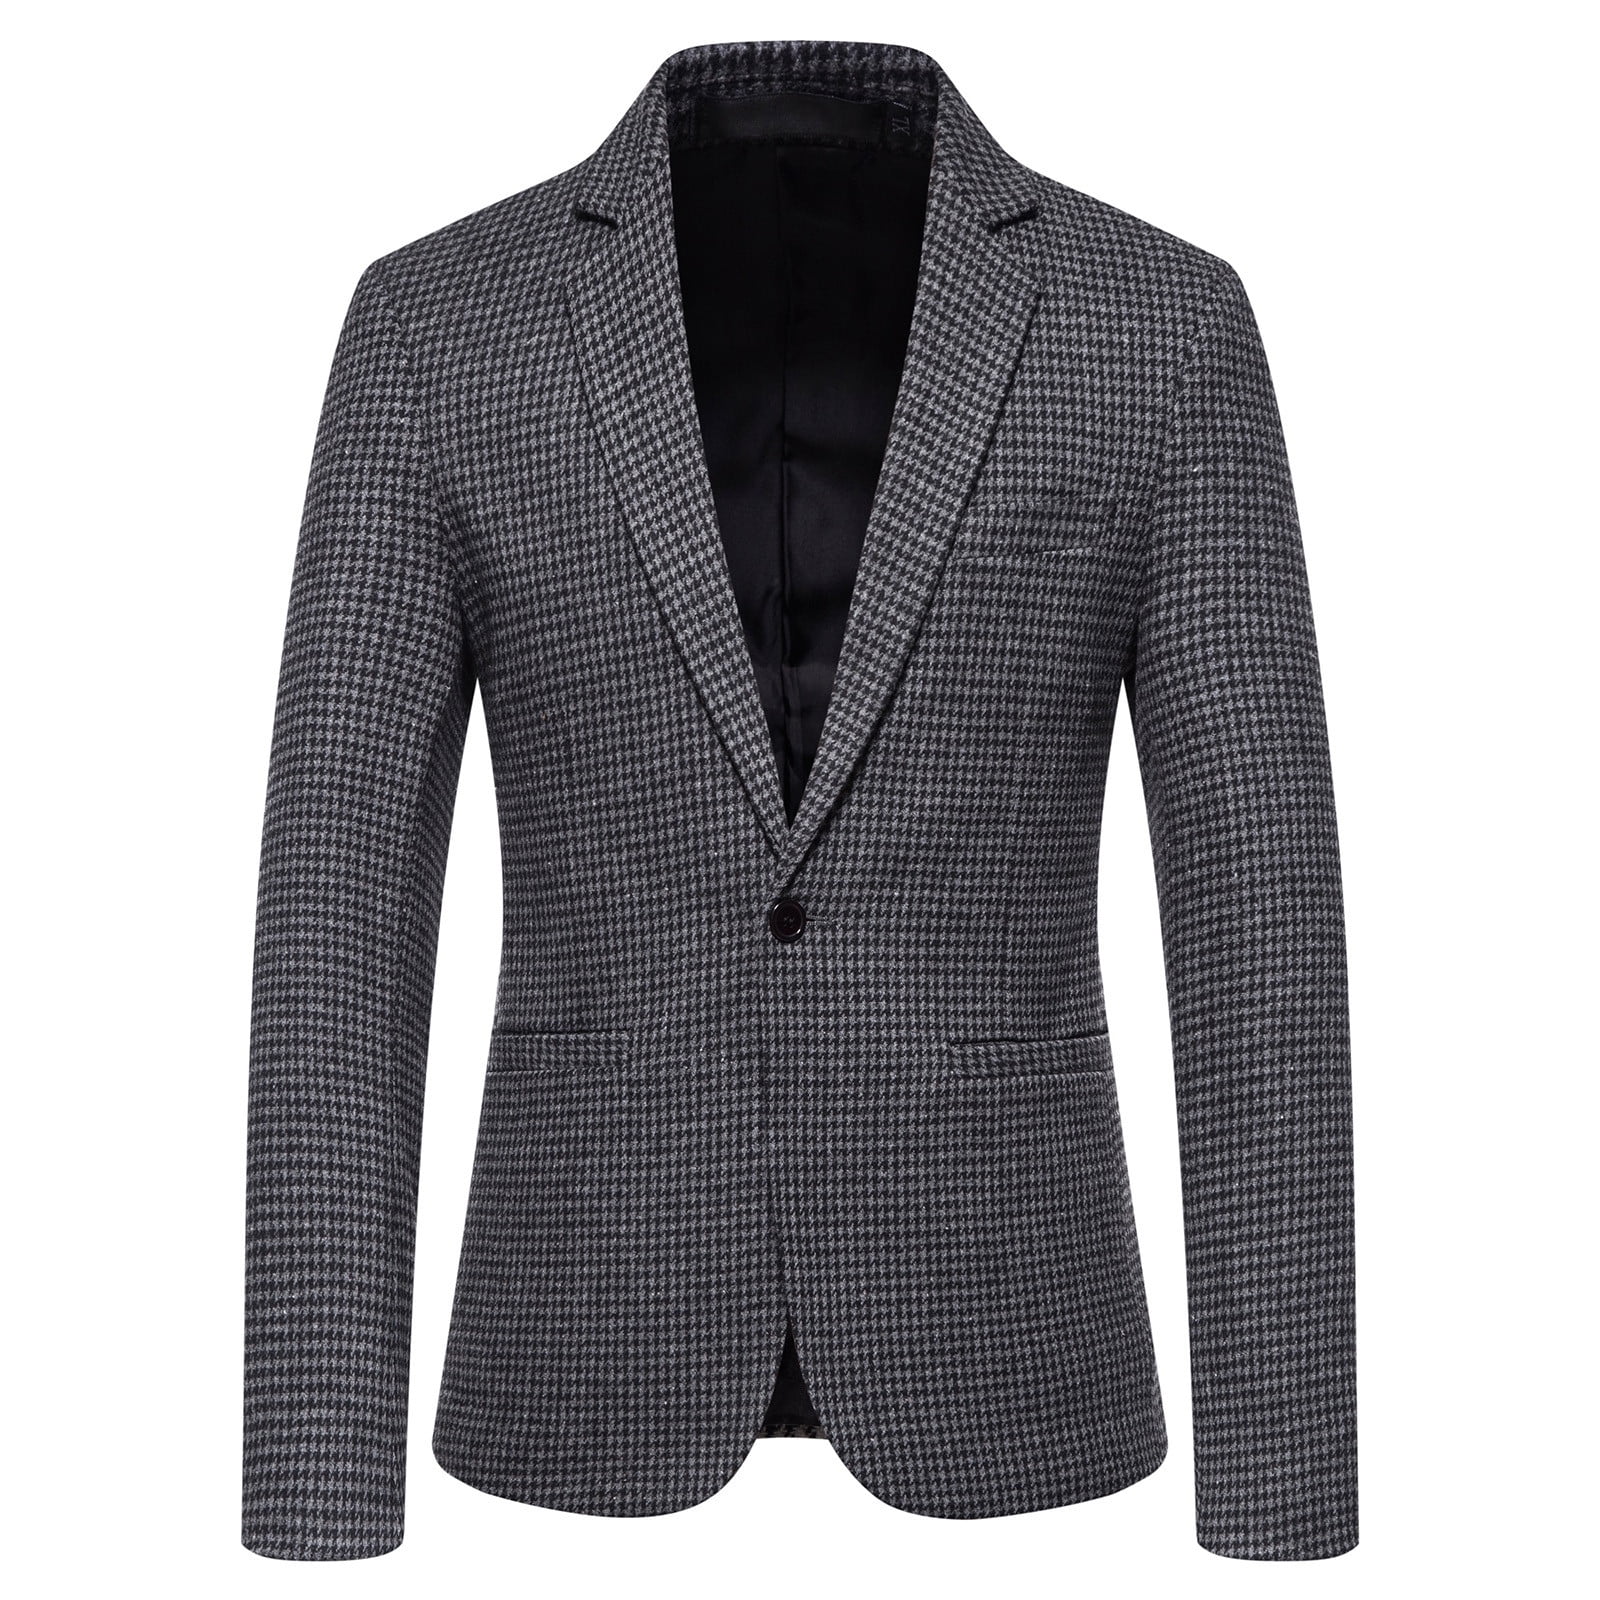 BELLZELY Blazers for Men Big and Tall Clearance Men's Single Breasted ...